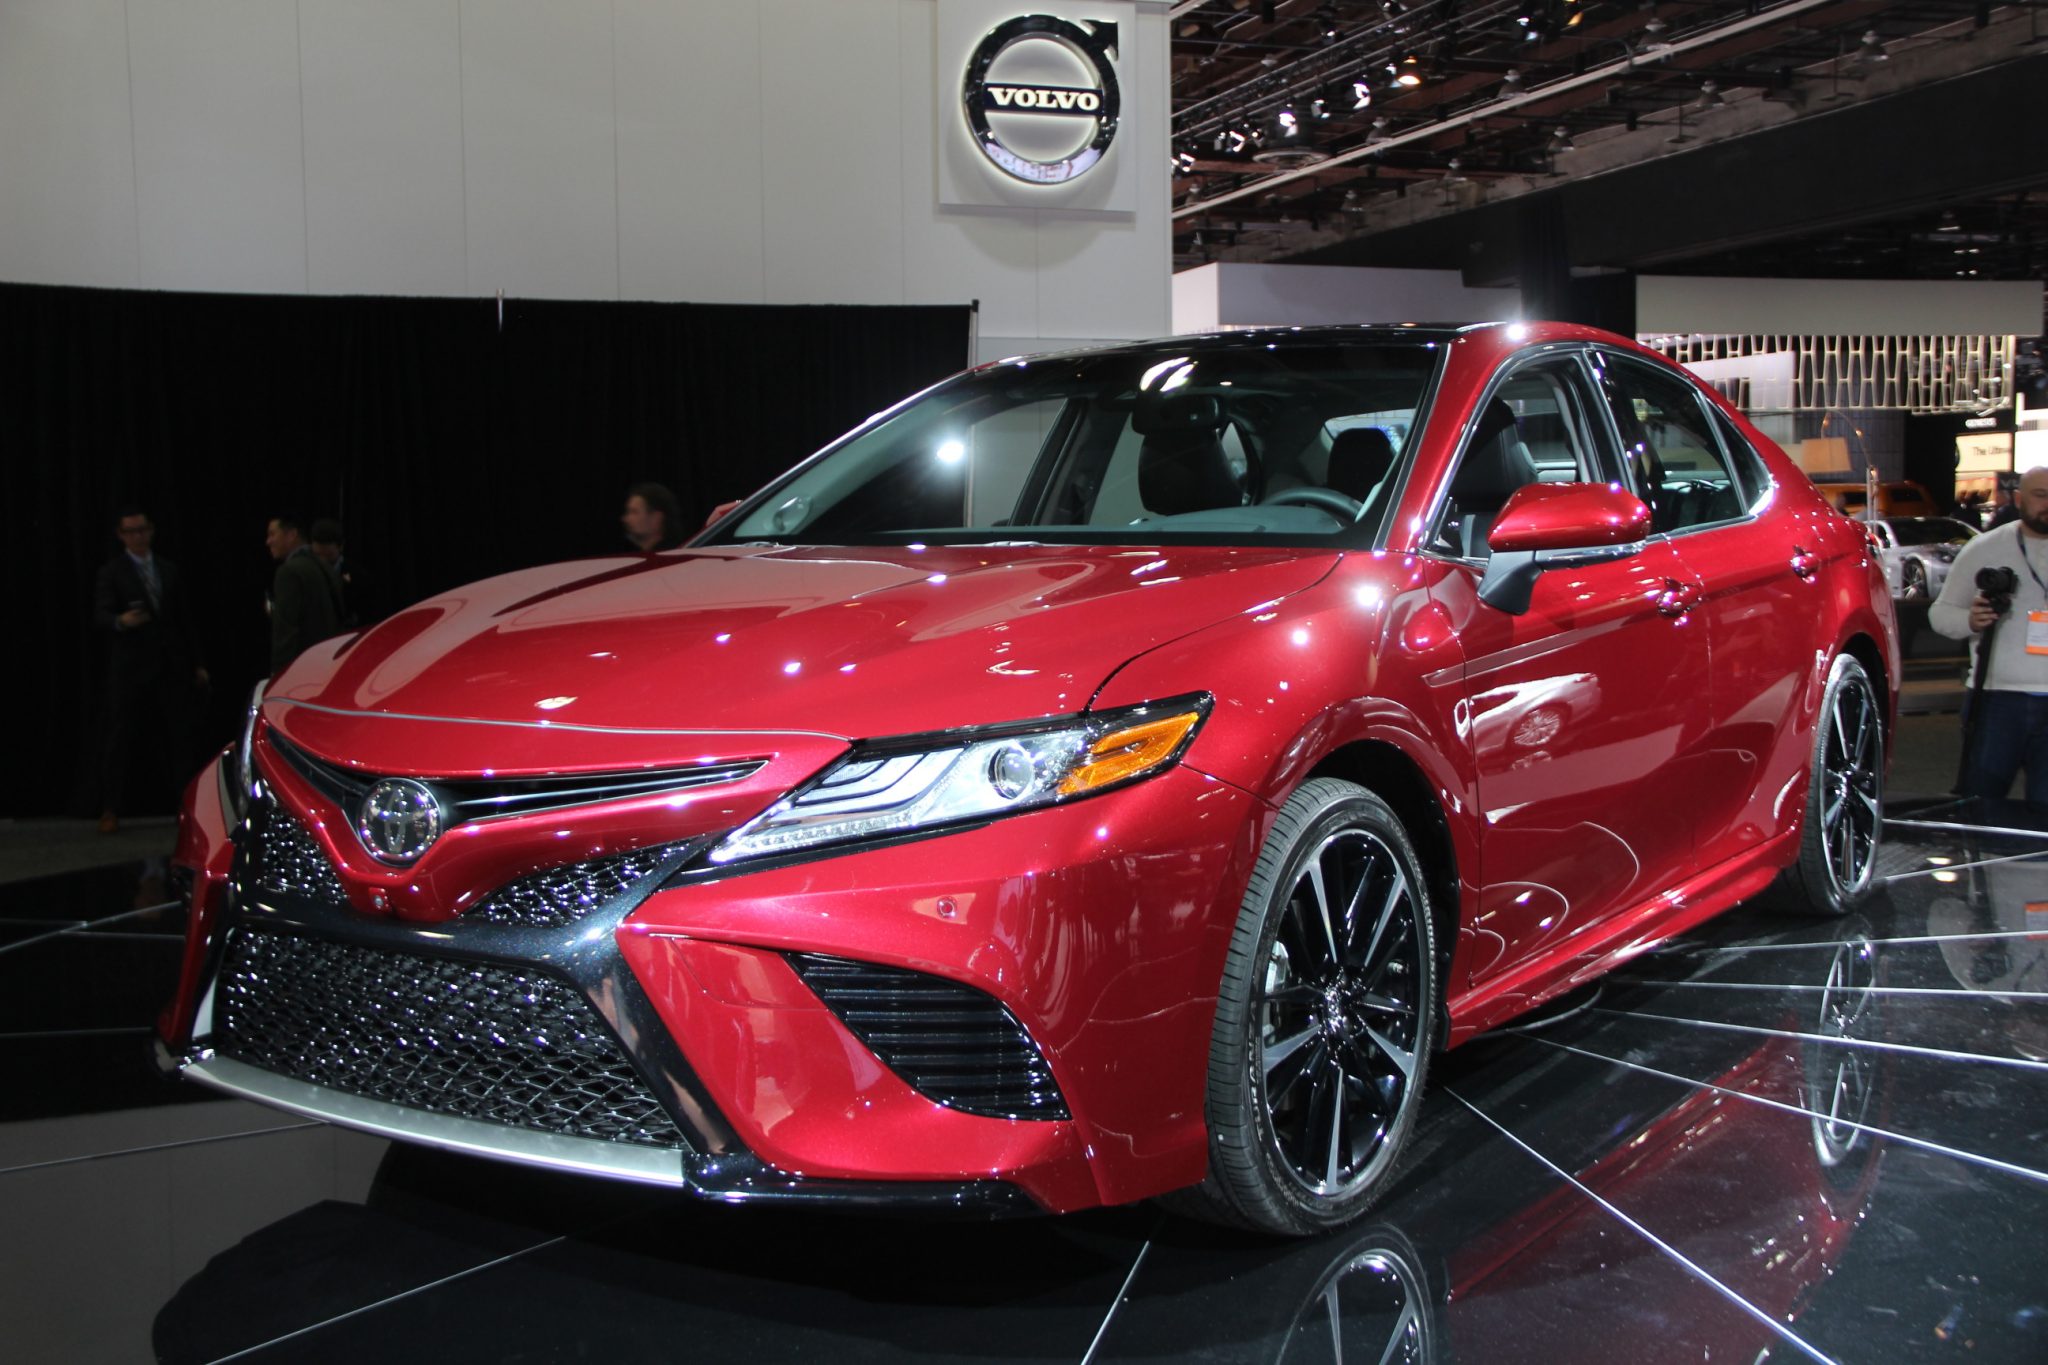 2018 Toyota Camry Review